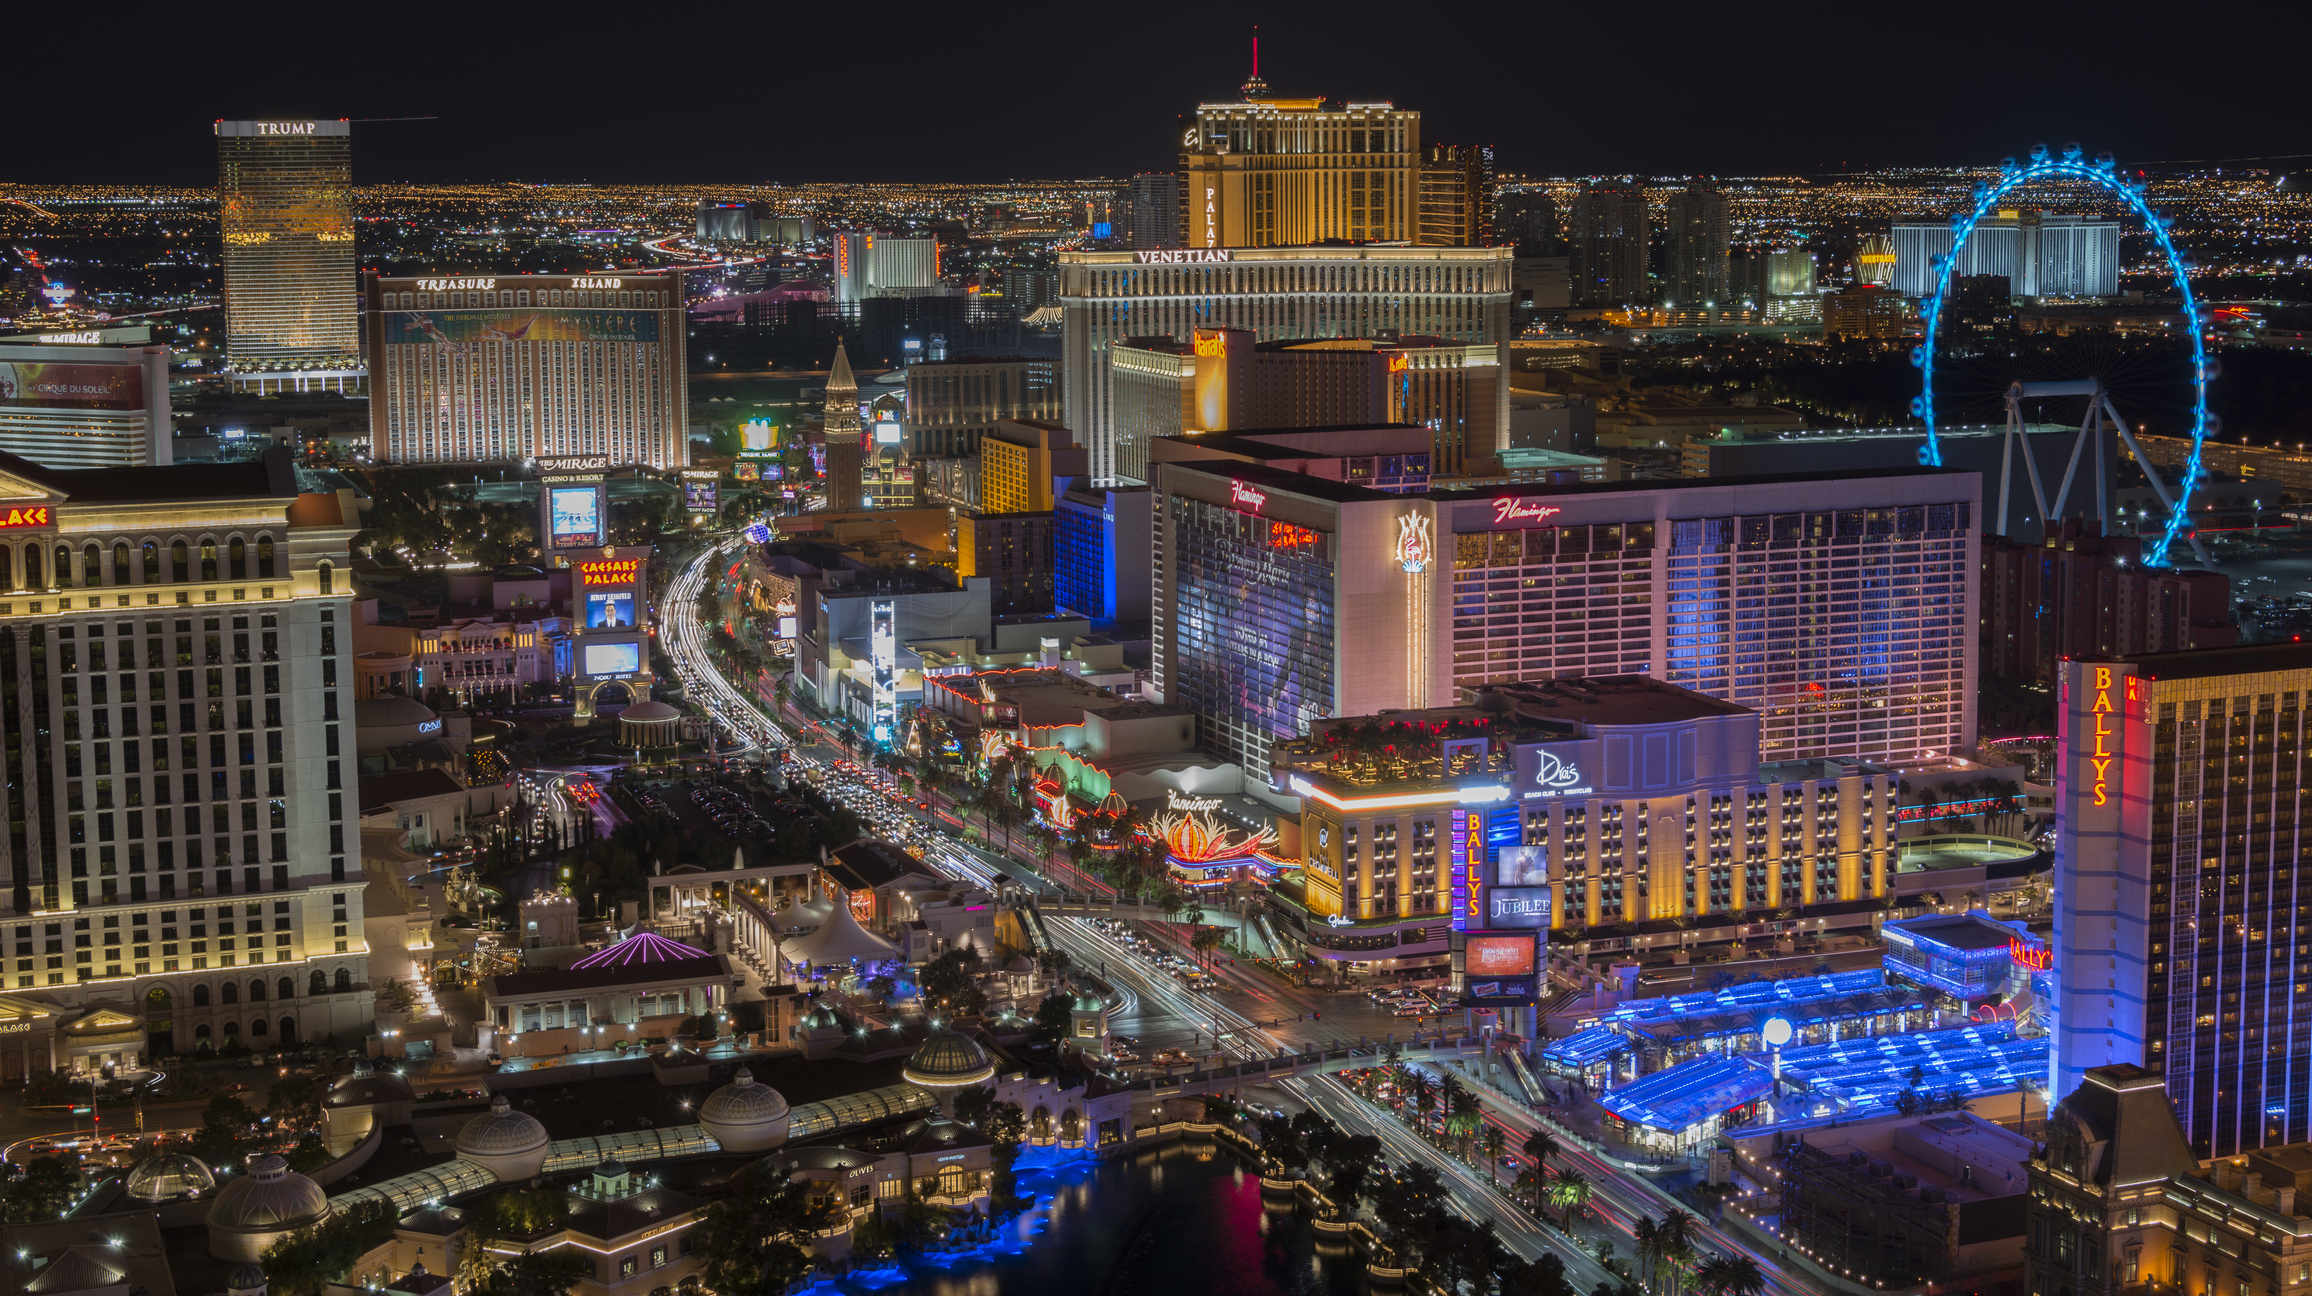 A picture of the Las Vegas strip at night taken from a high vantage point. The view is north along the mid-strip area on December 23, 2015.